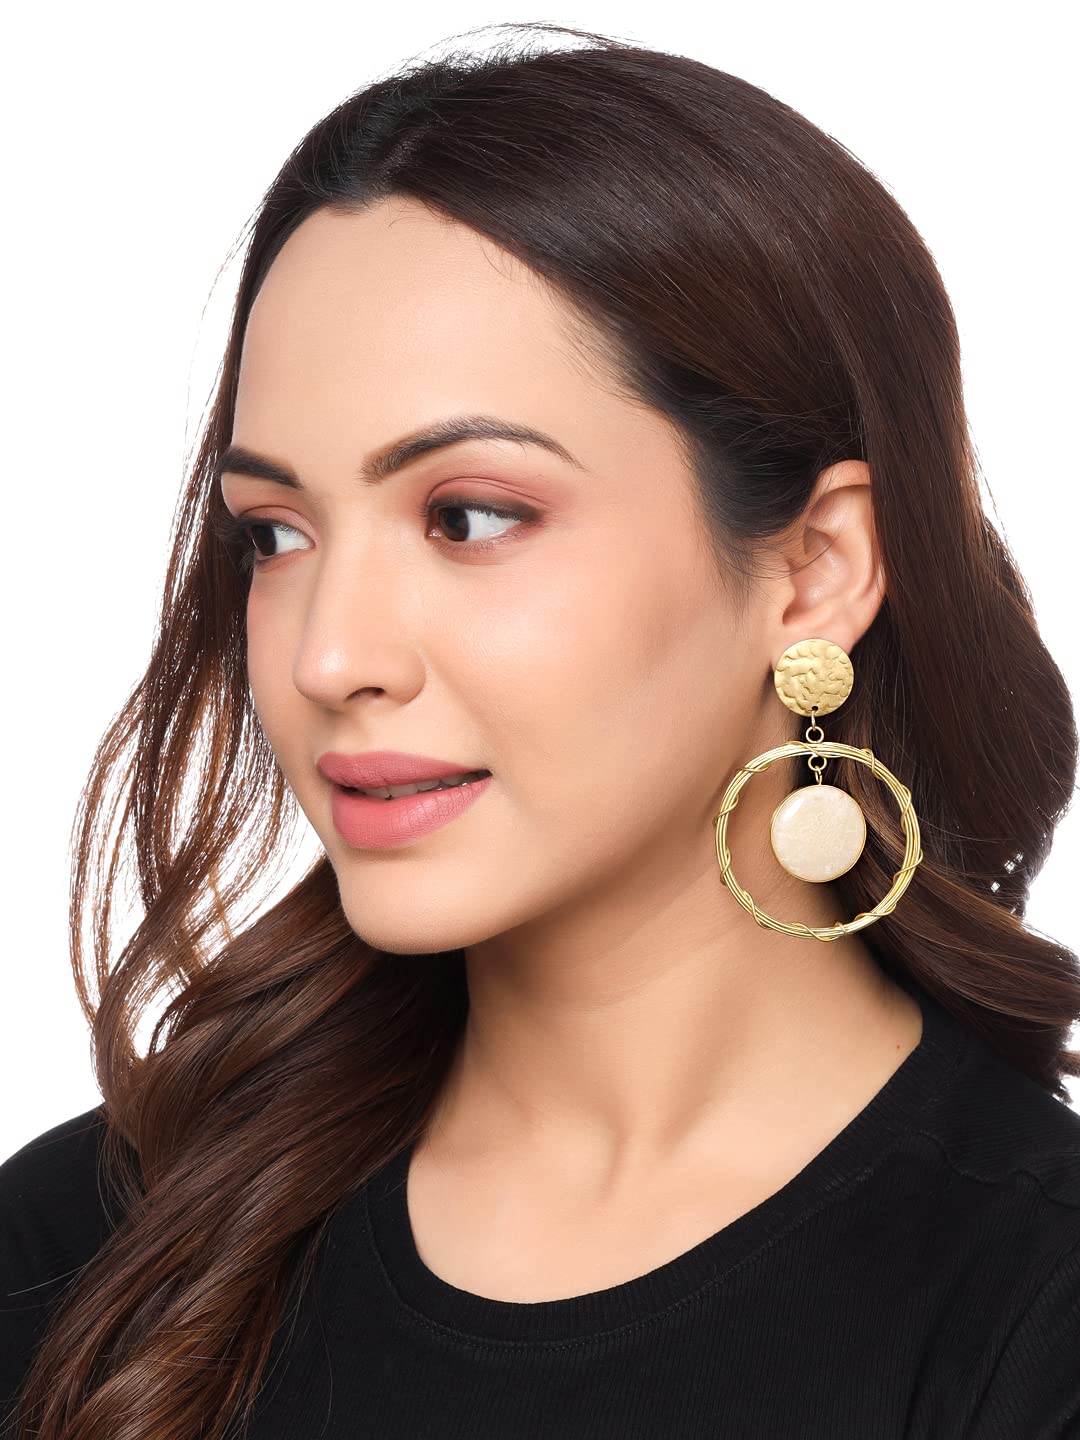 Yellow Chimes Earrings for Women and Girls  White Drop Earring  Gold Plated Drop  Circular Designed White Stone Hanging Western Drop Earrings  Accessories Jewellery for Women  Birthday Gift for Girls and Women Anniversary Gift for Wife